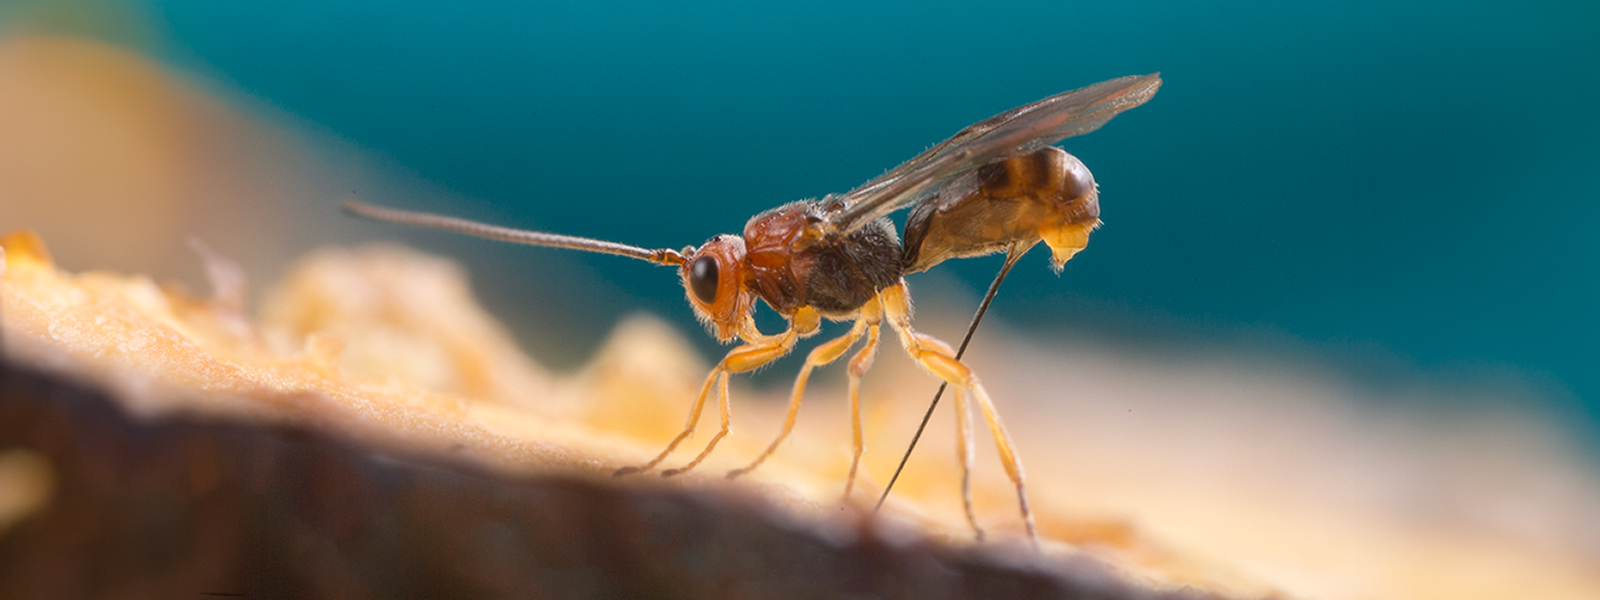  A Fopius arisanus wasp probes into food medium with her stinger, looking for fruit fly maggots to lay her eggs in. When F. arisanus wasps lay their e